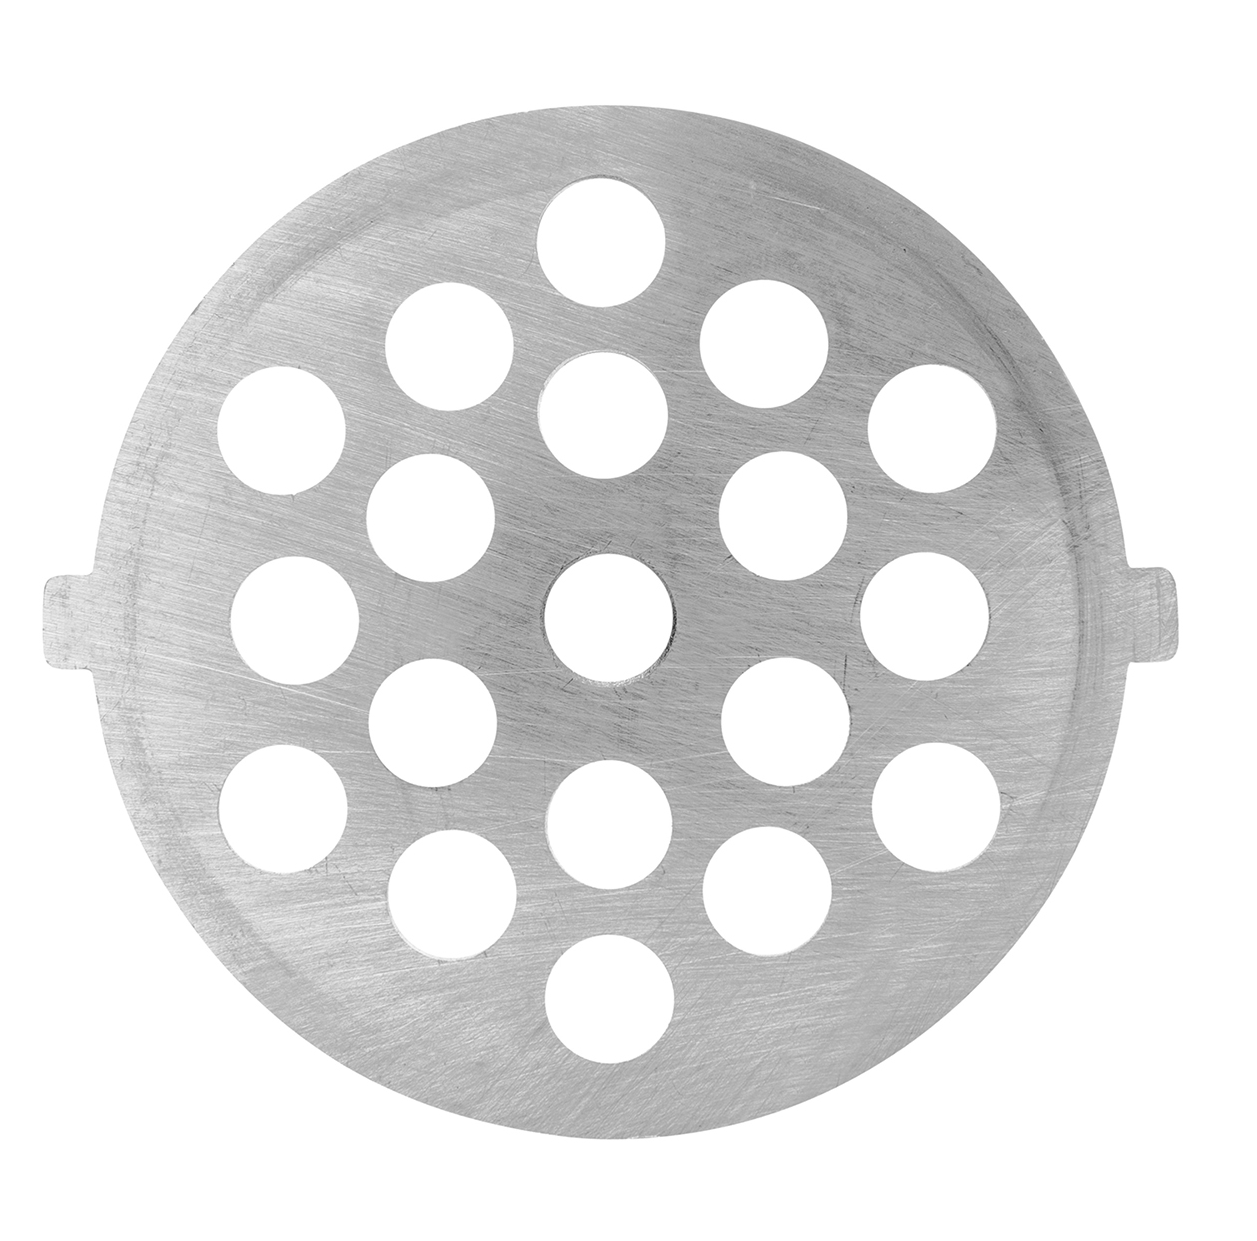 Luvele, 8mm Stainless Steel Cutting Plate for the Luvele Meat Grinder,Meat Grinder